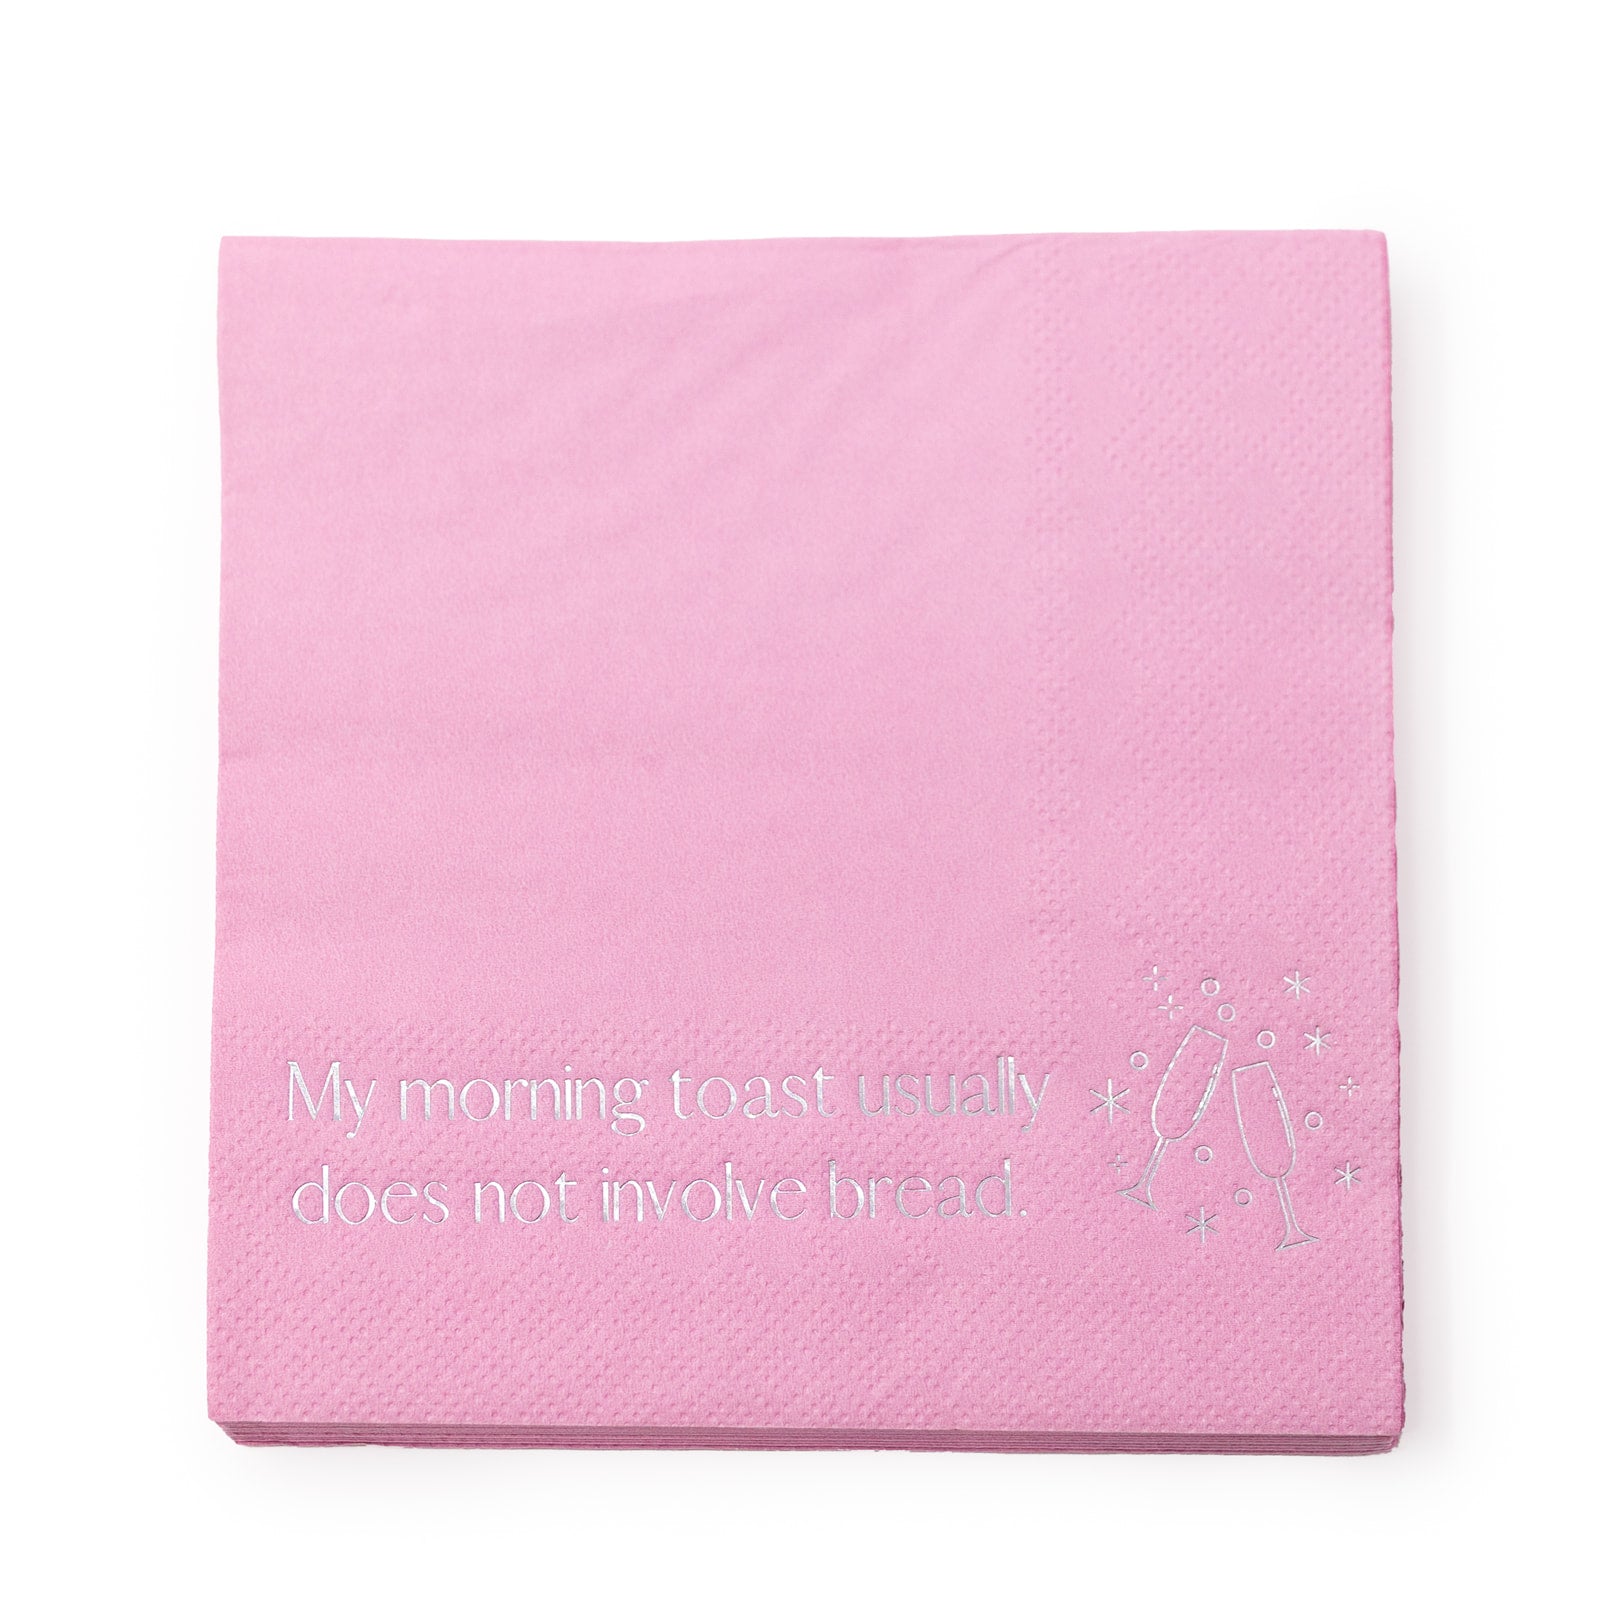 My Morning Toast Usually Does Not Involve Bread Cocktail Napkins (set of 20)